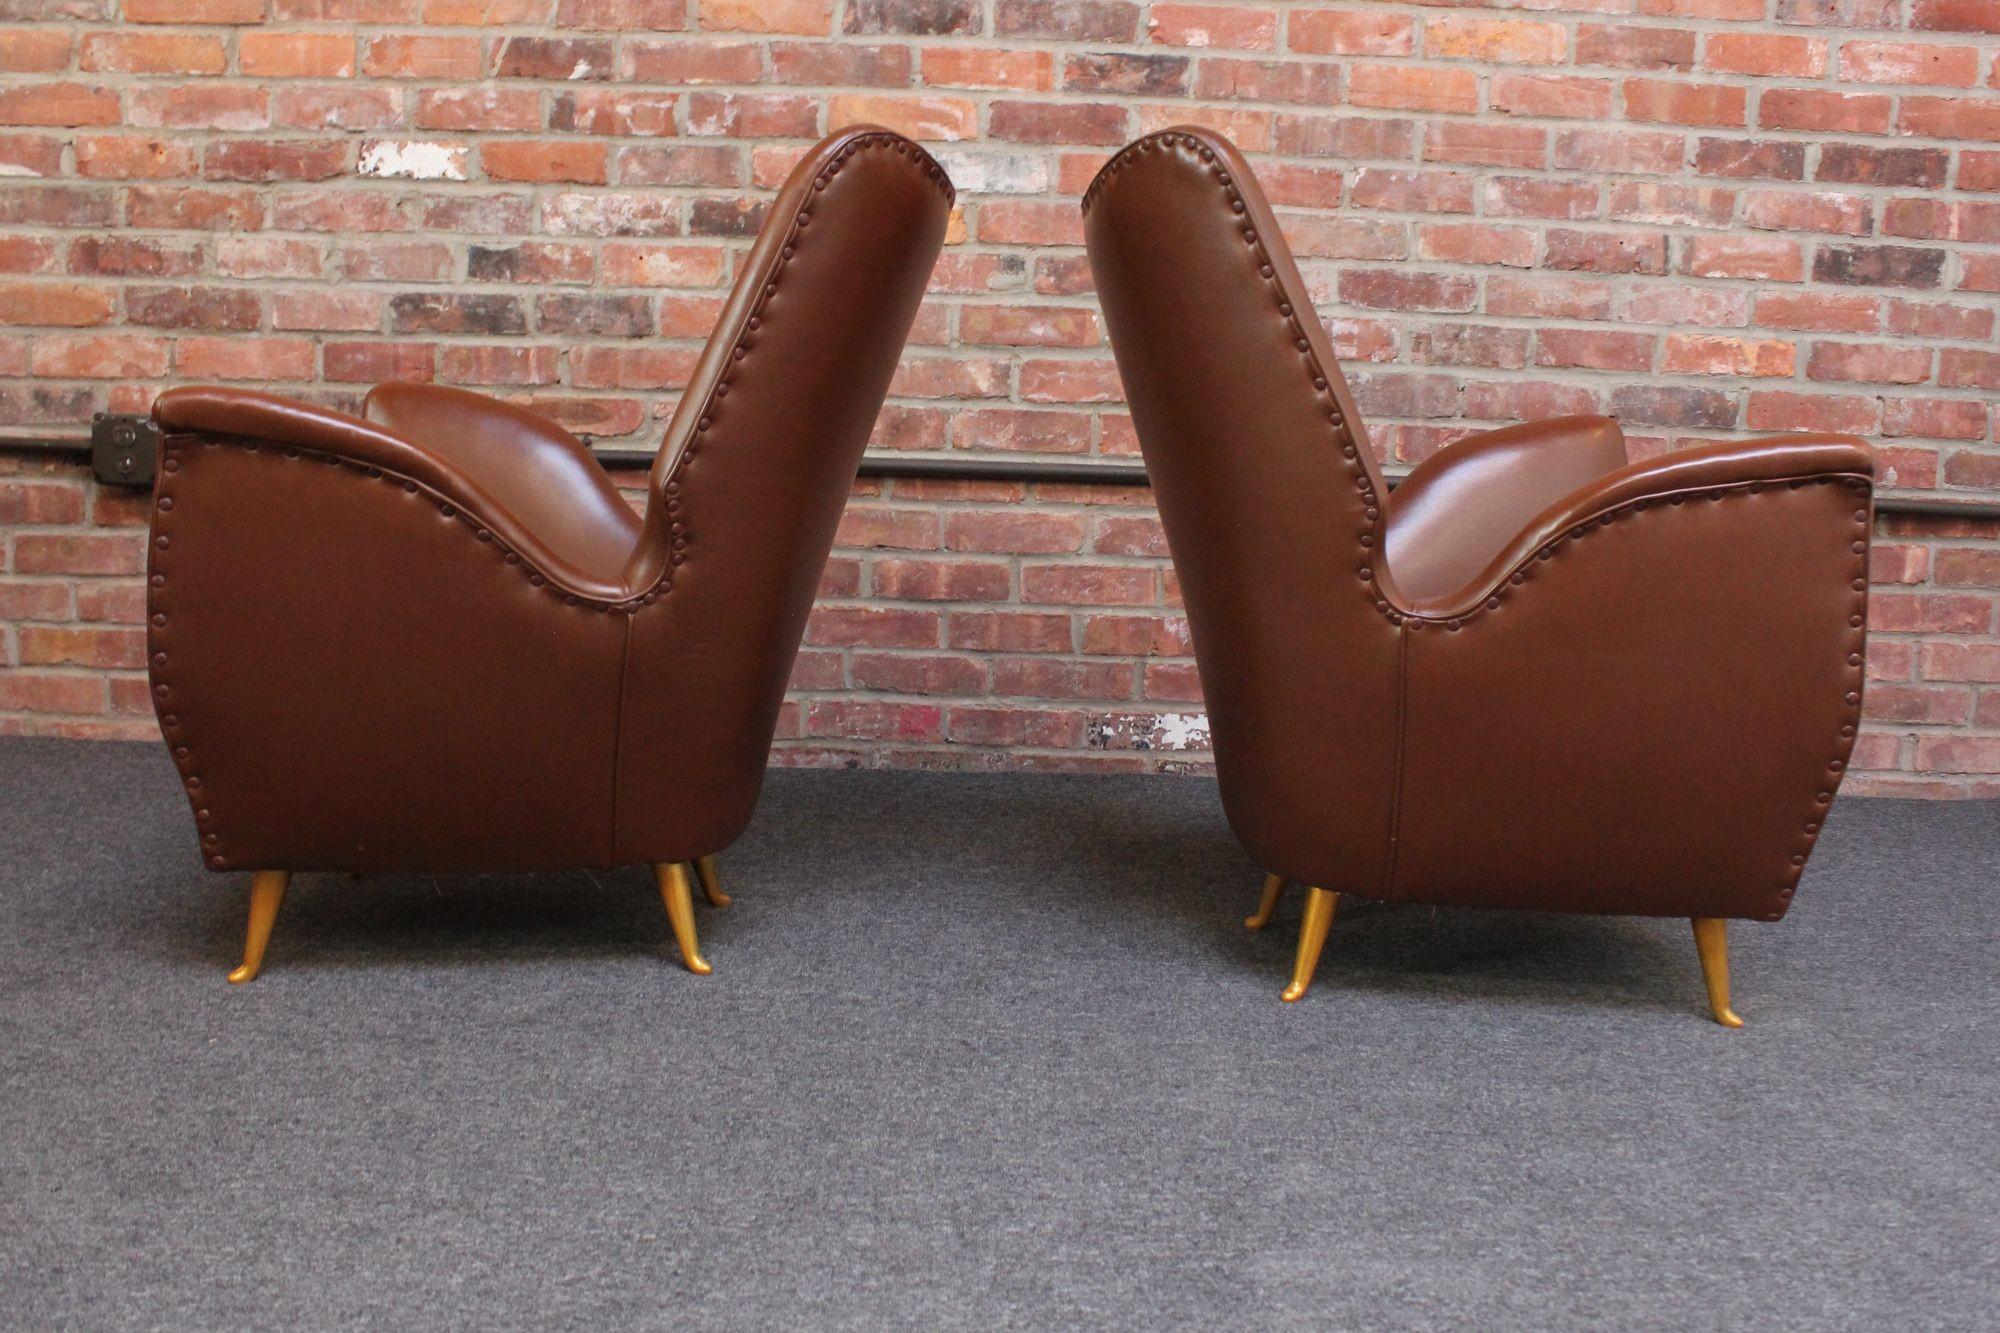 Pair of Isa Bergamo Sculptural Petite Club Chairs Attributed to Gio Ponti In Good Condition For Sale In Brooklyn, NY